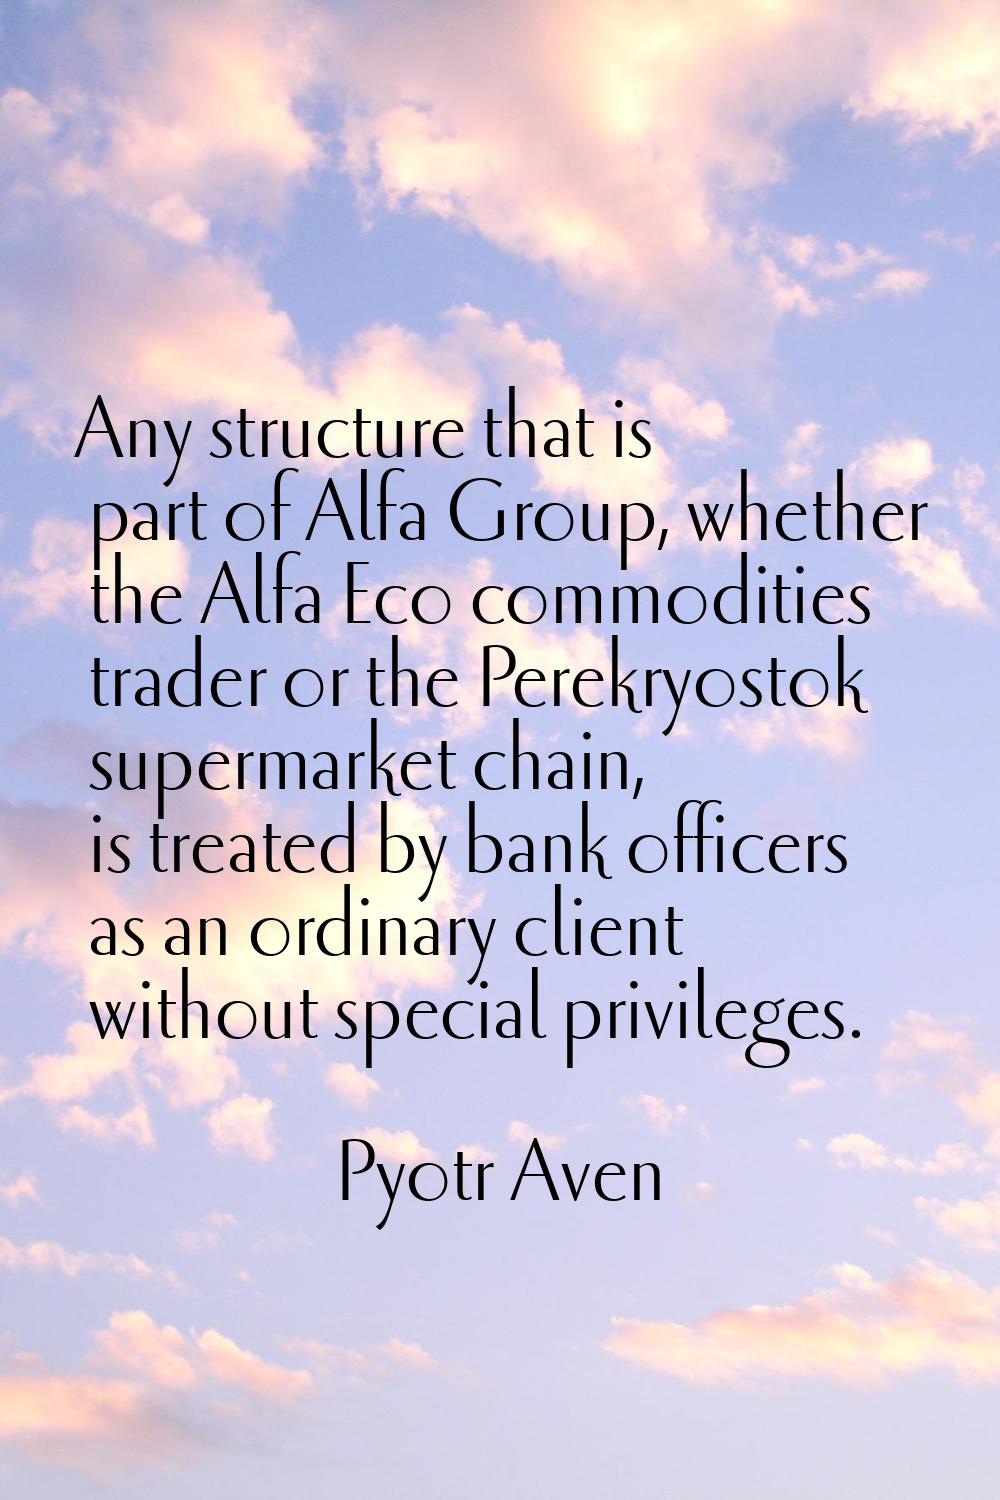 Any structure that is part of Alfa Group, whether the Alfa Eco commodities trader or the Perekryost